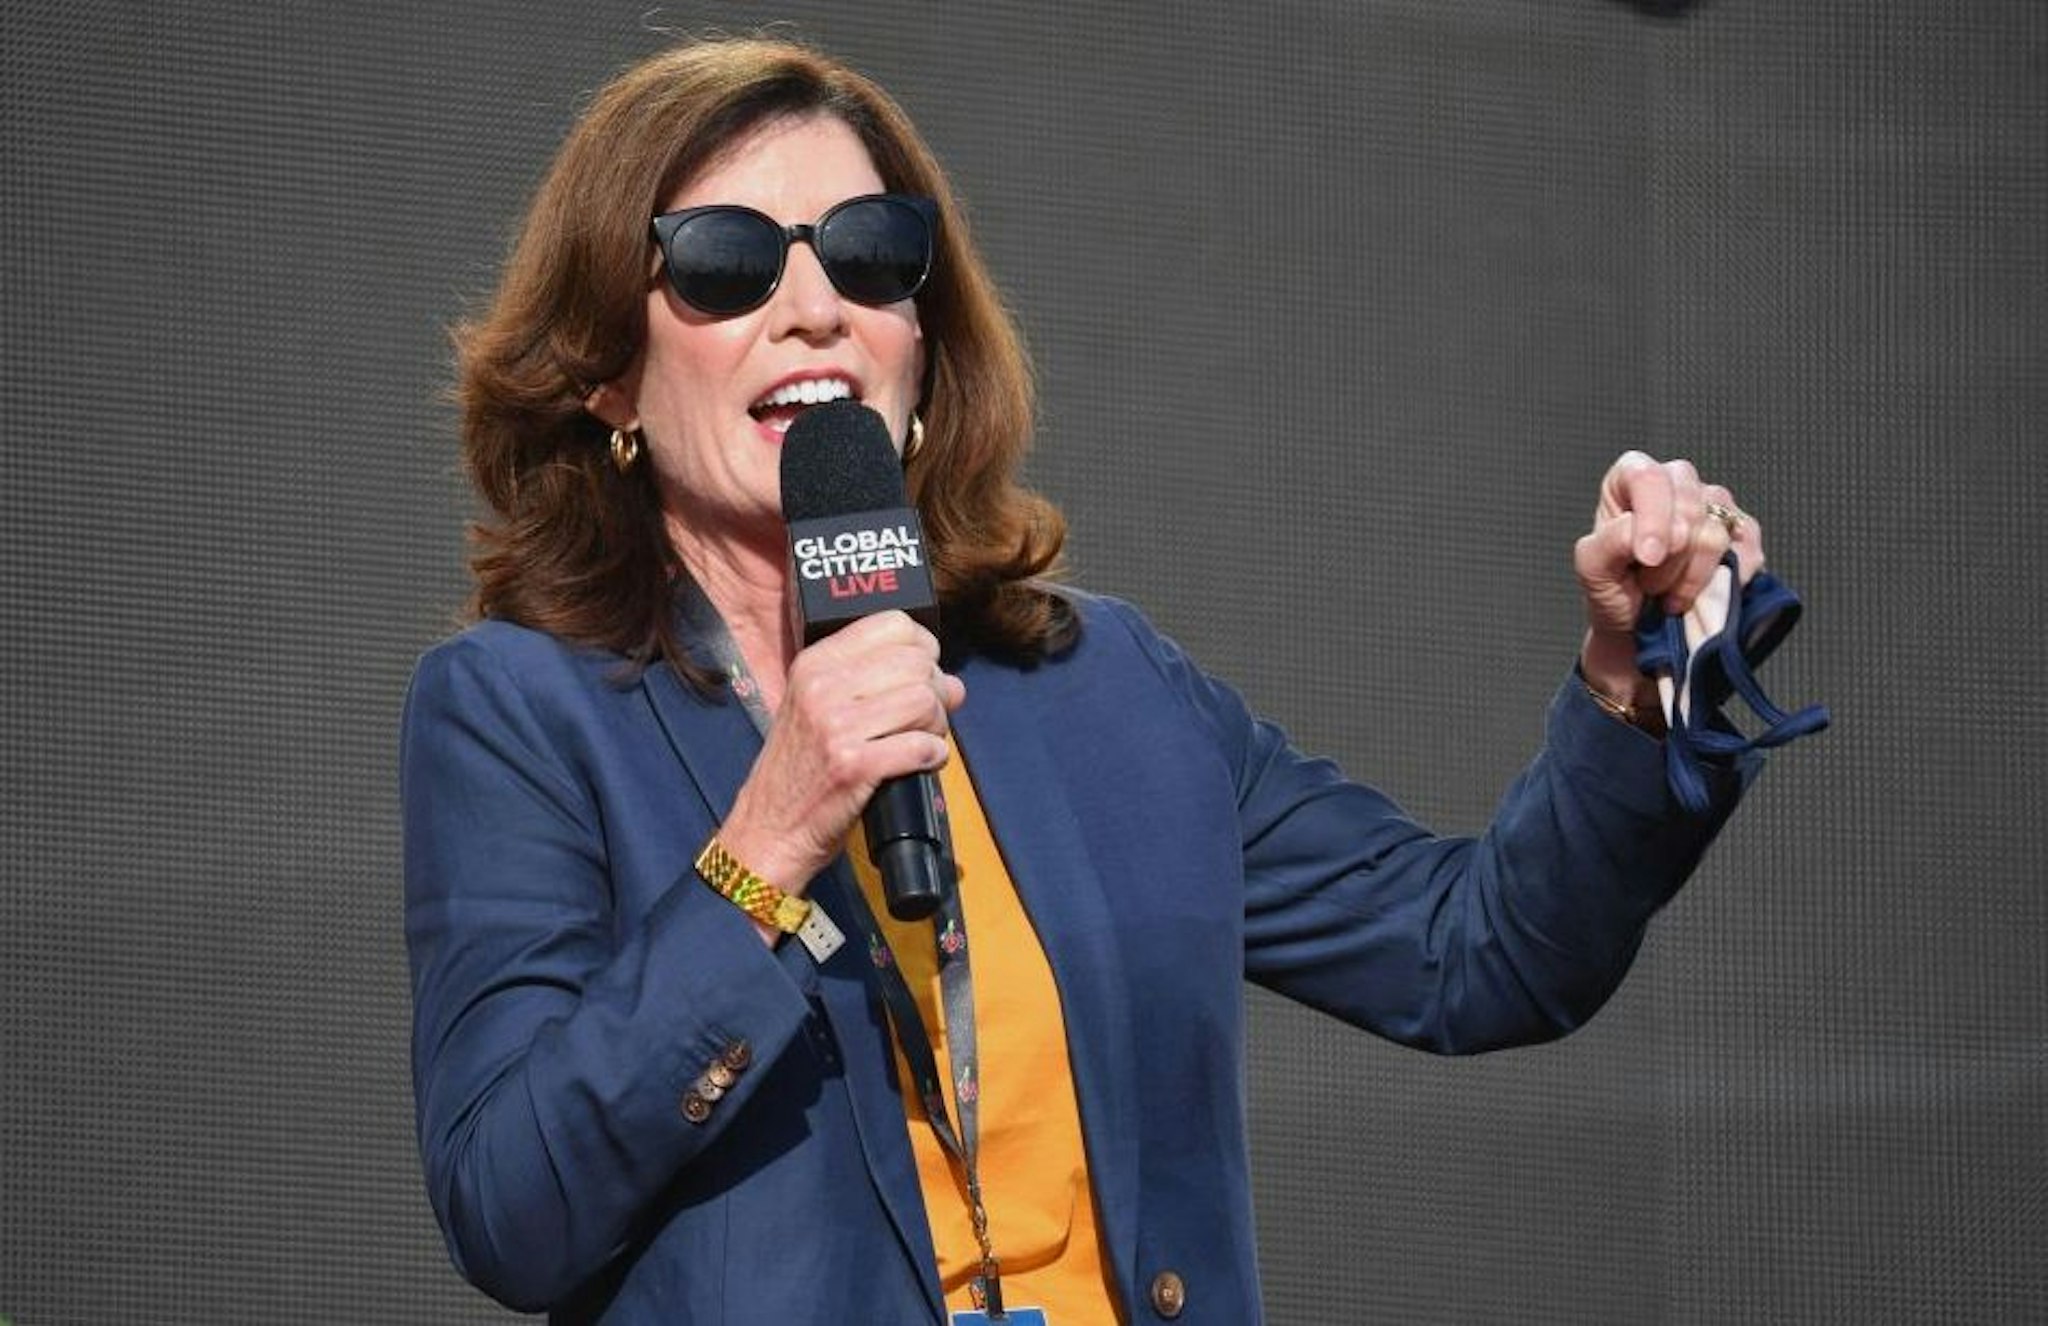 New York Governor Kathy Hochul speaks during the 2021 Global Citizen Live festival at the Great Lawn, Central Park on September 25, 2021 in New York City.